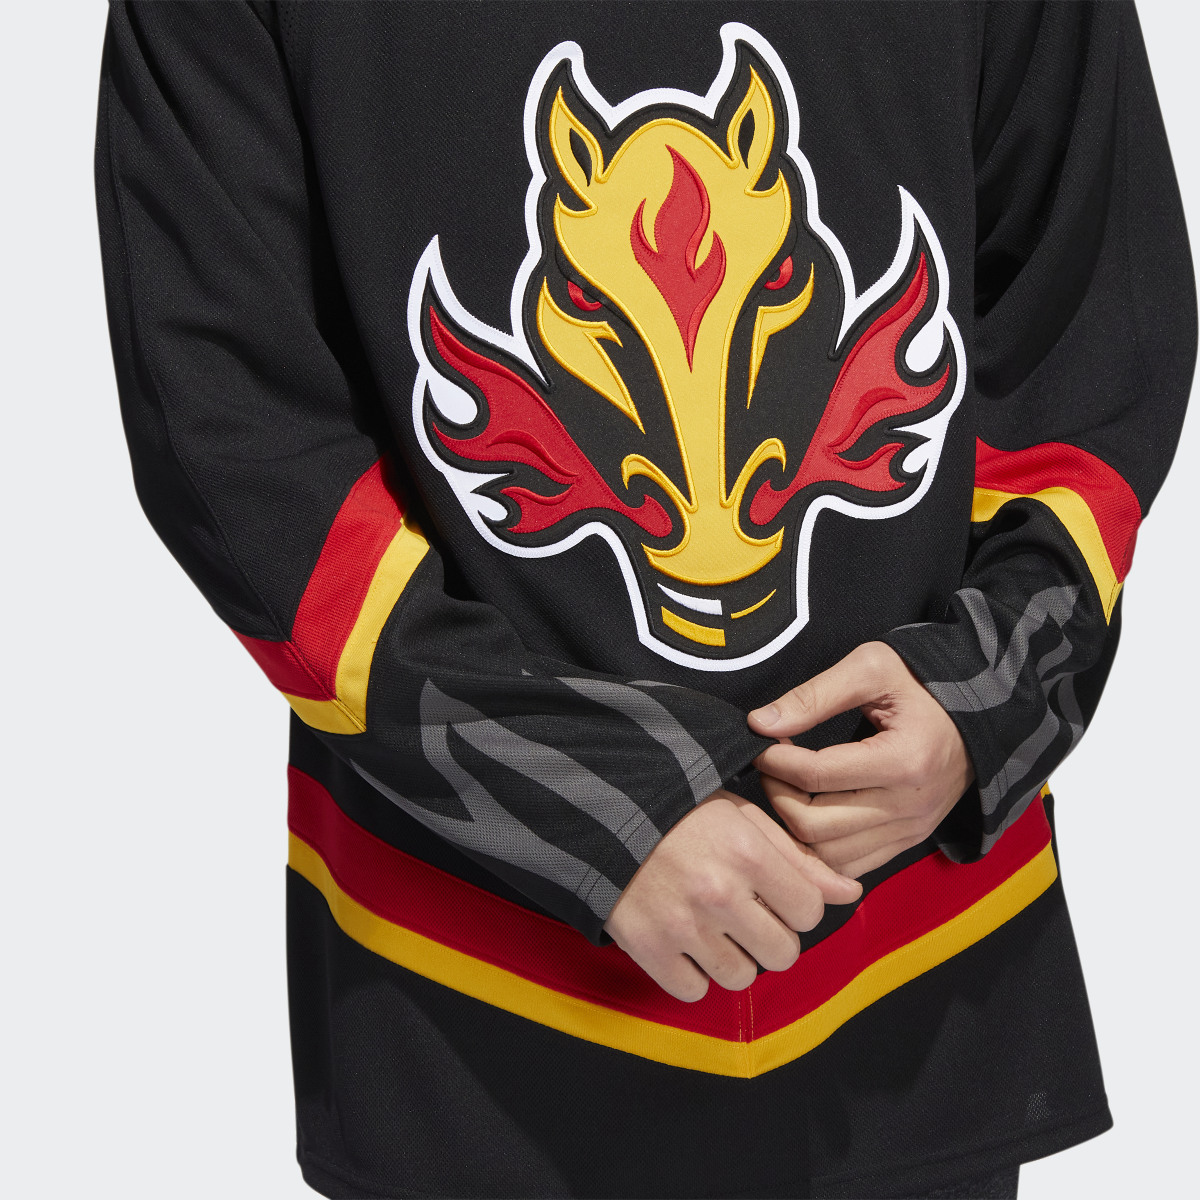 Adidas Flames Third Authentic Jersey. 7